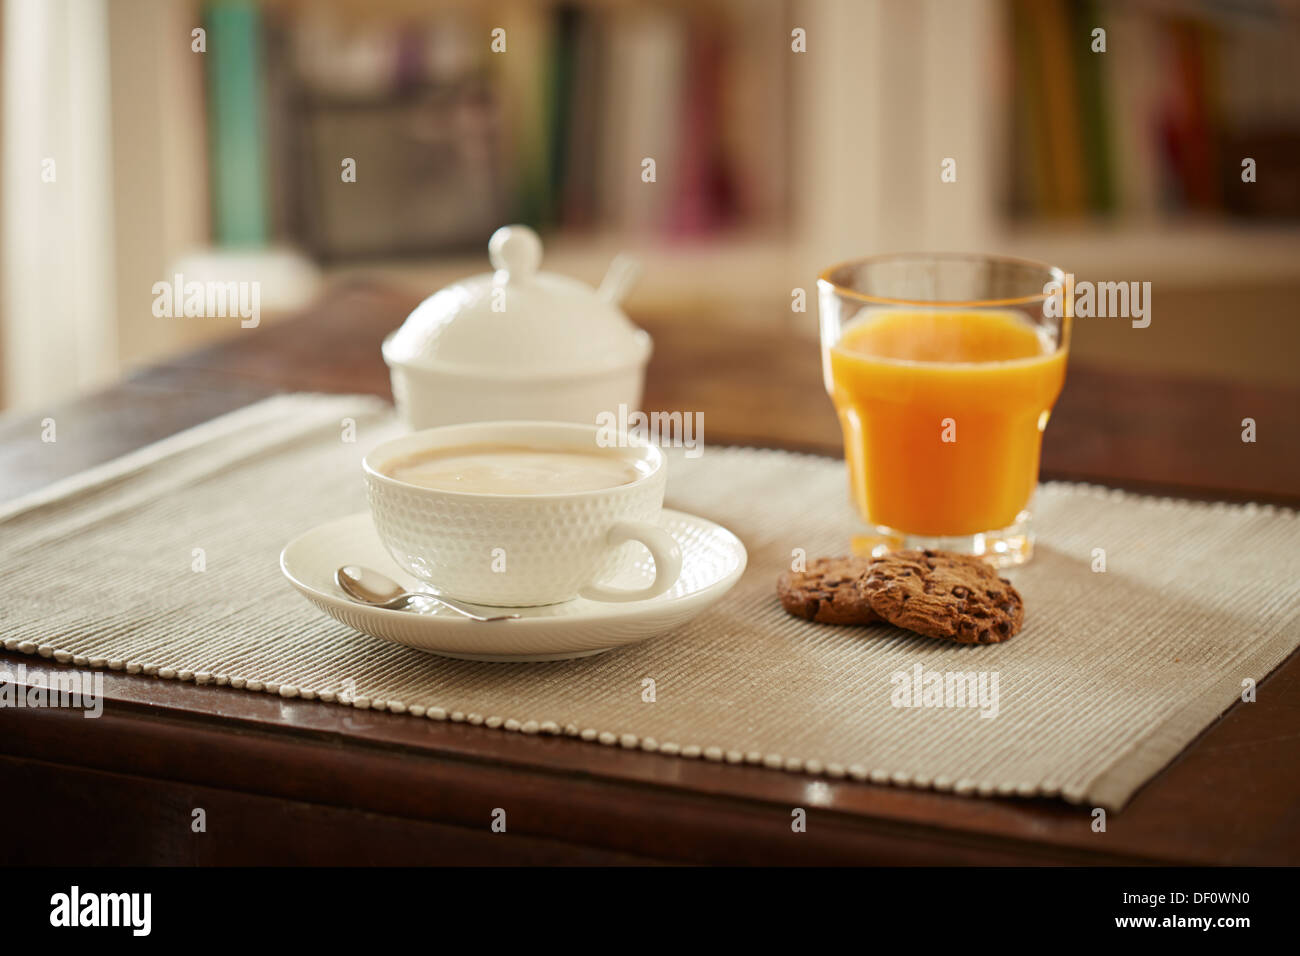 Lovely breakfast table with juice, coffe and cookies Stock Photo